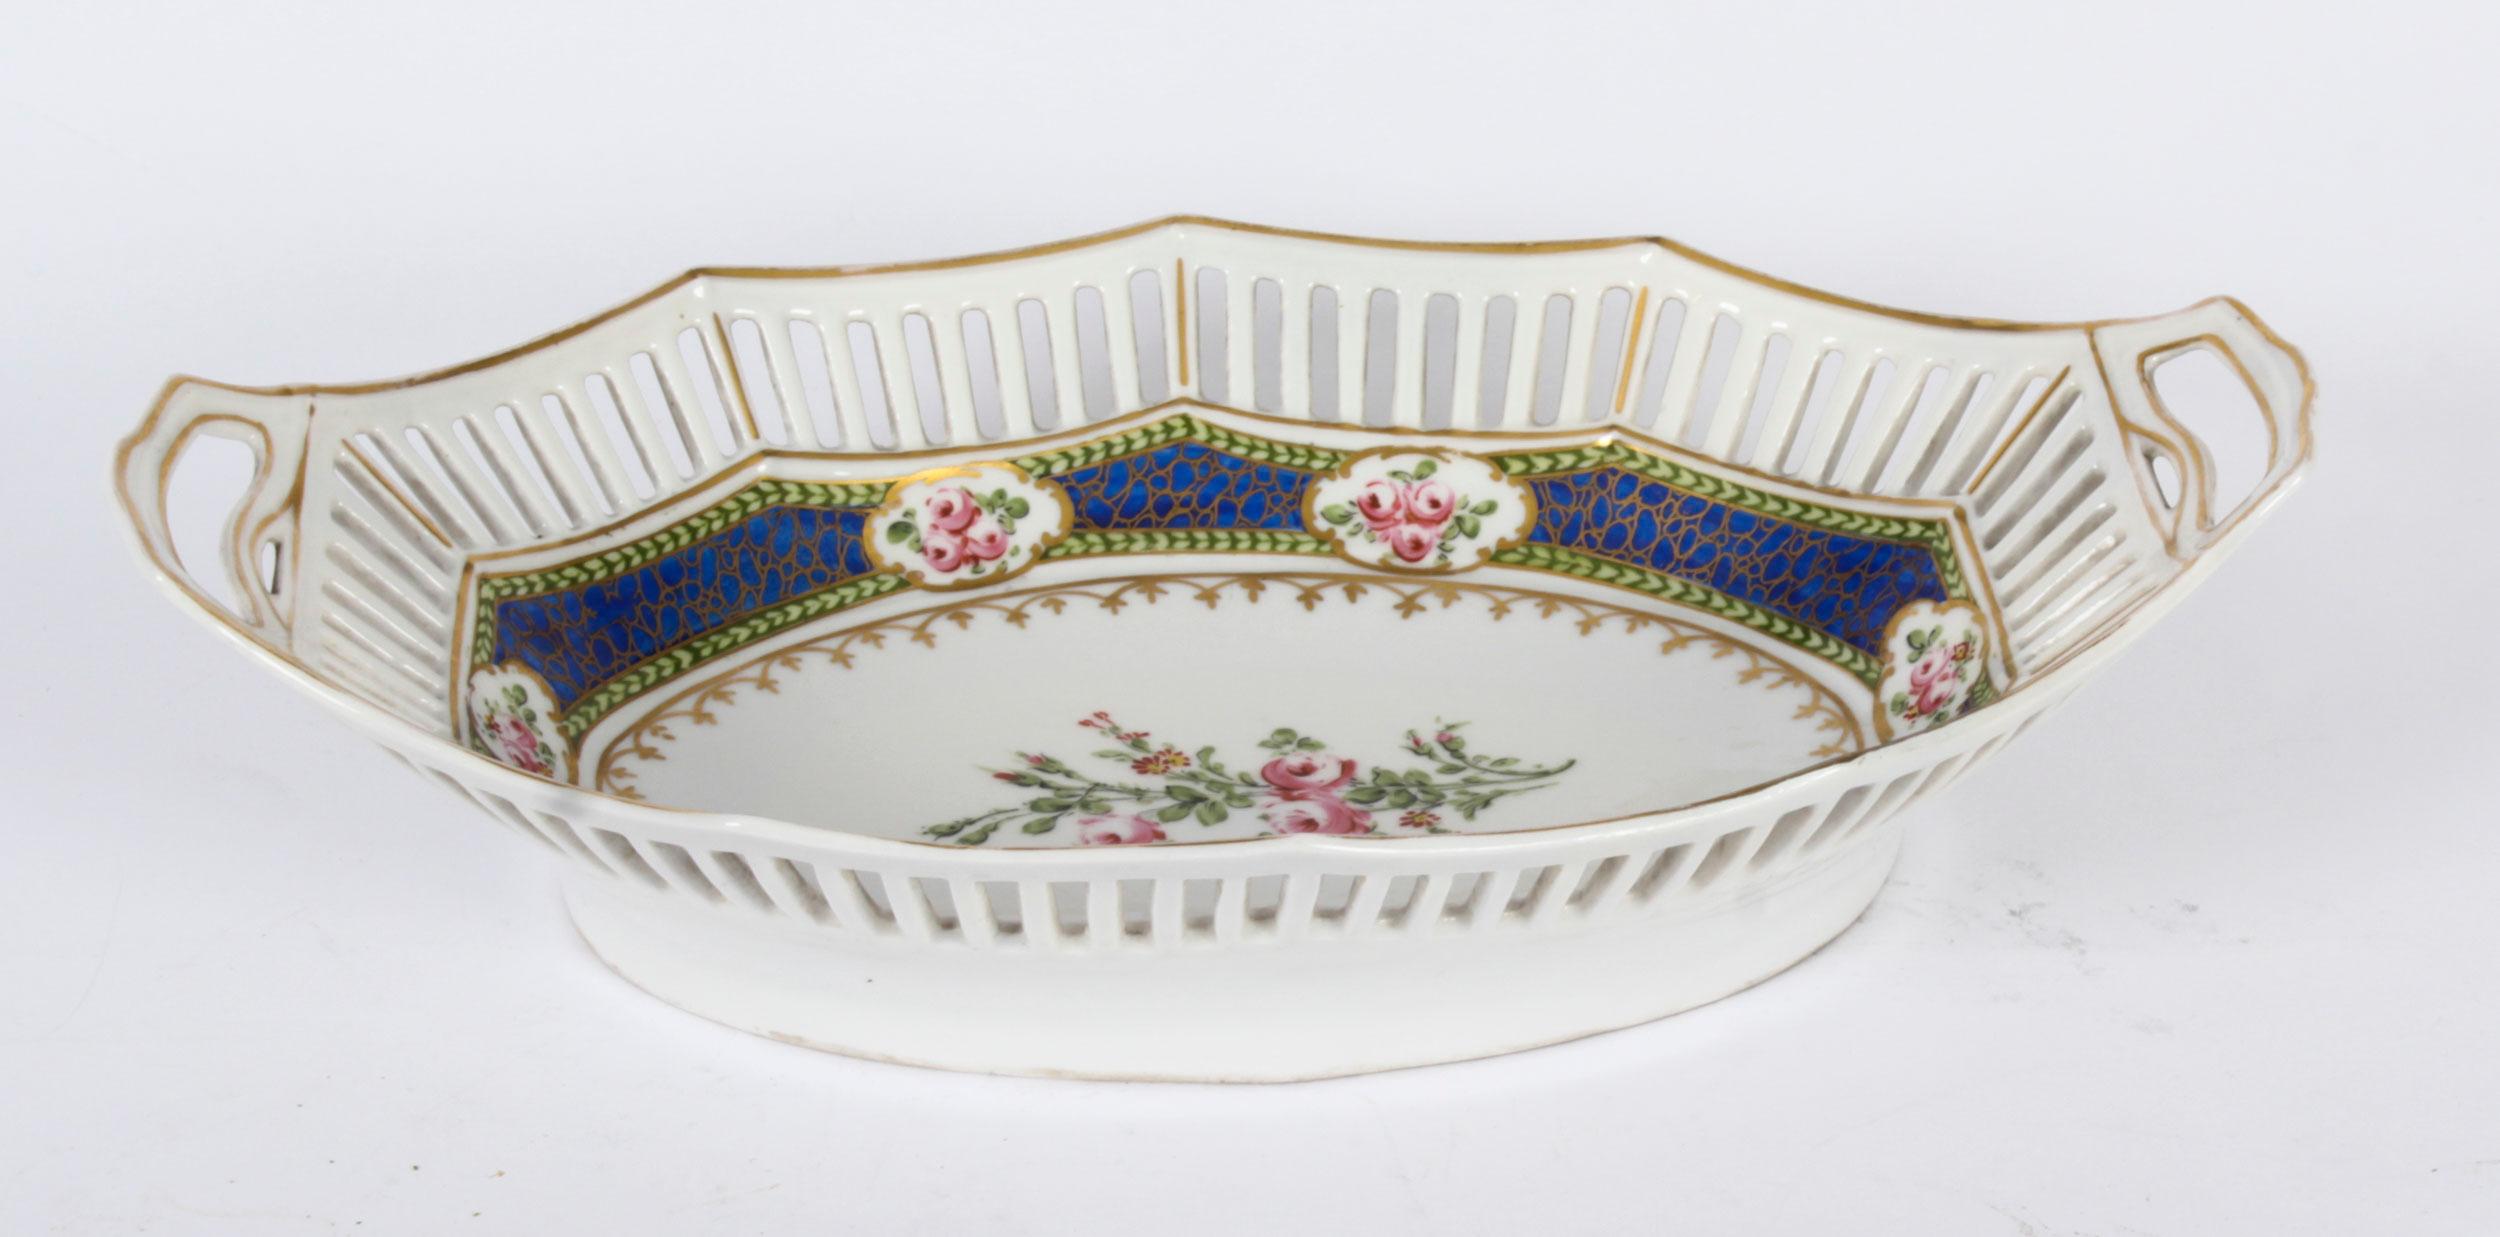 Antique French Sevres Oval Porcelain Dish Late 19th Century For Sale 4